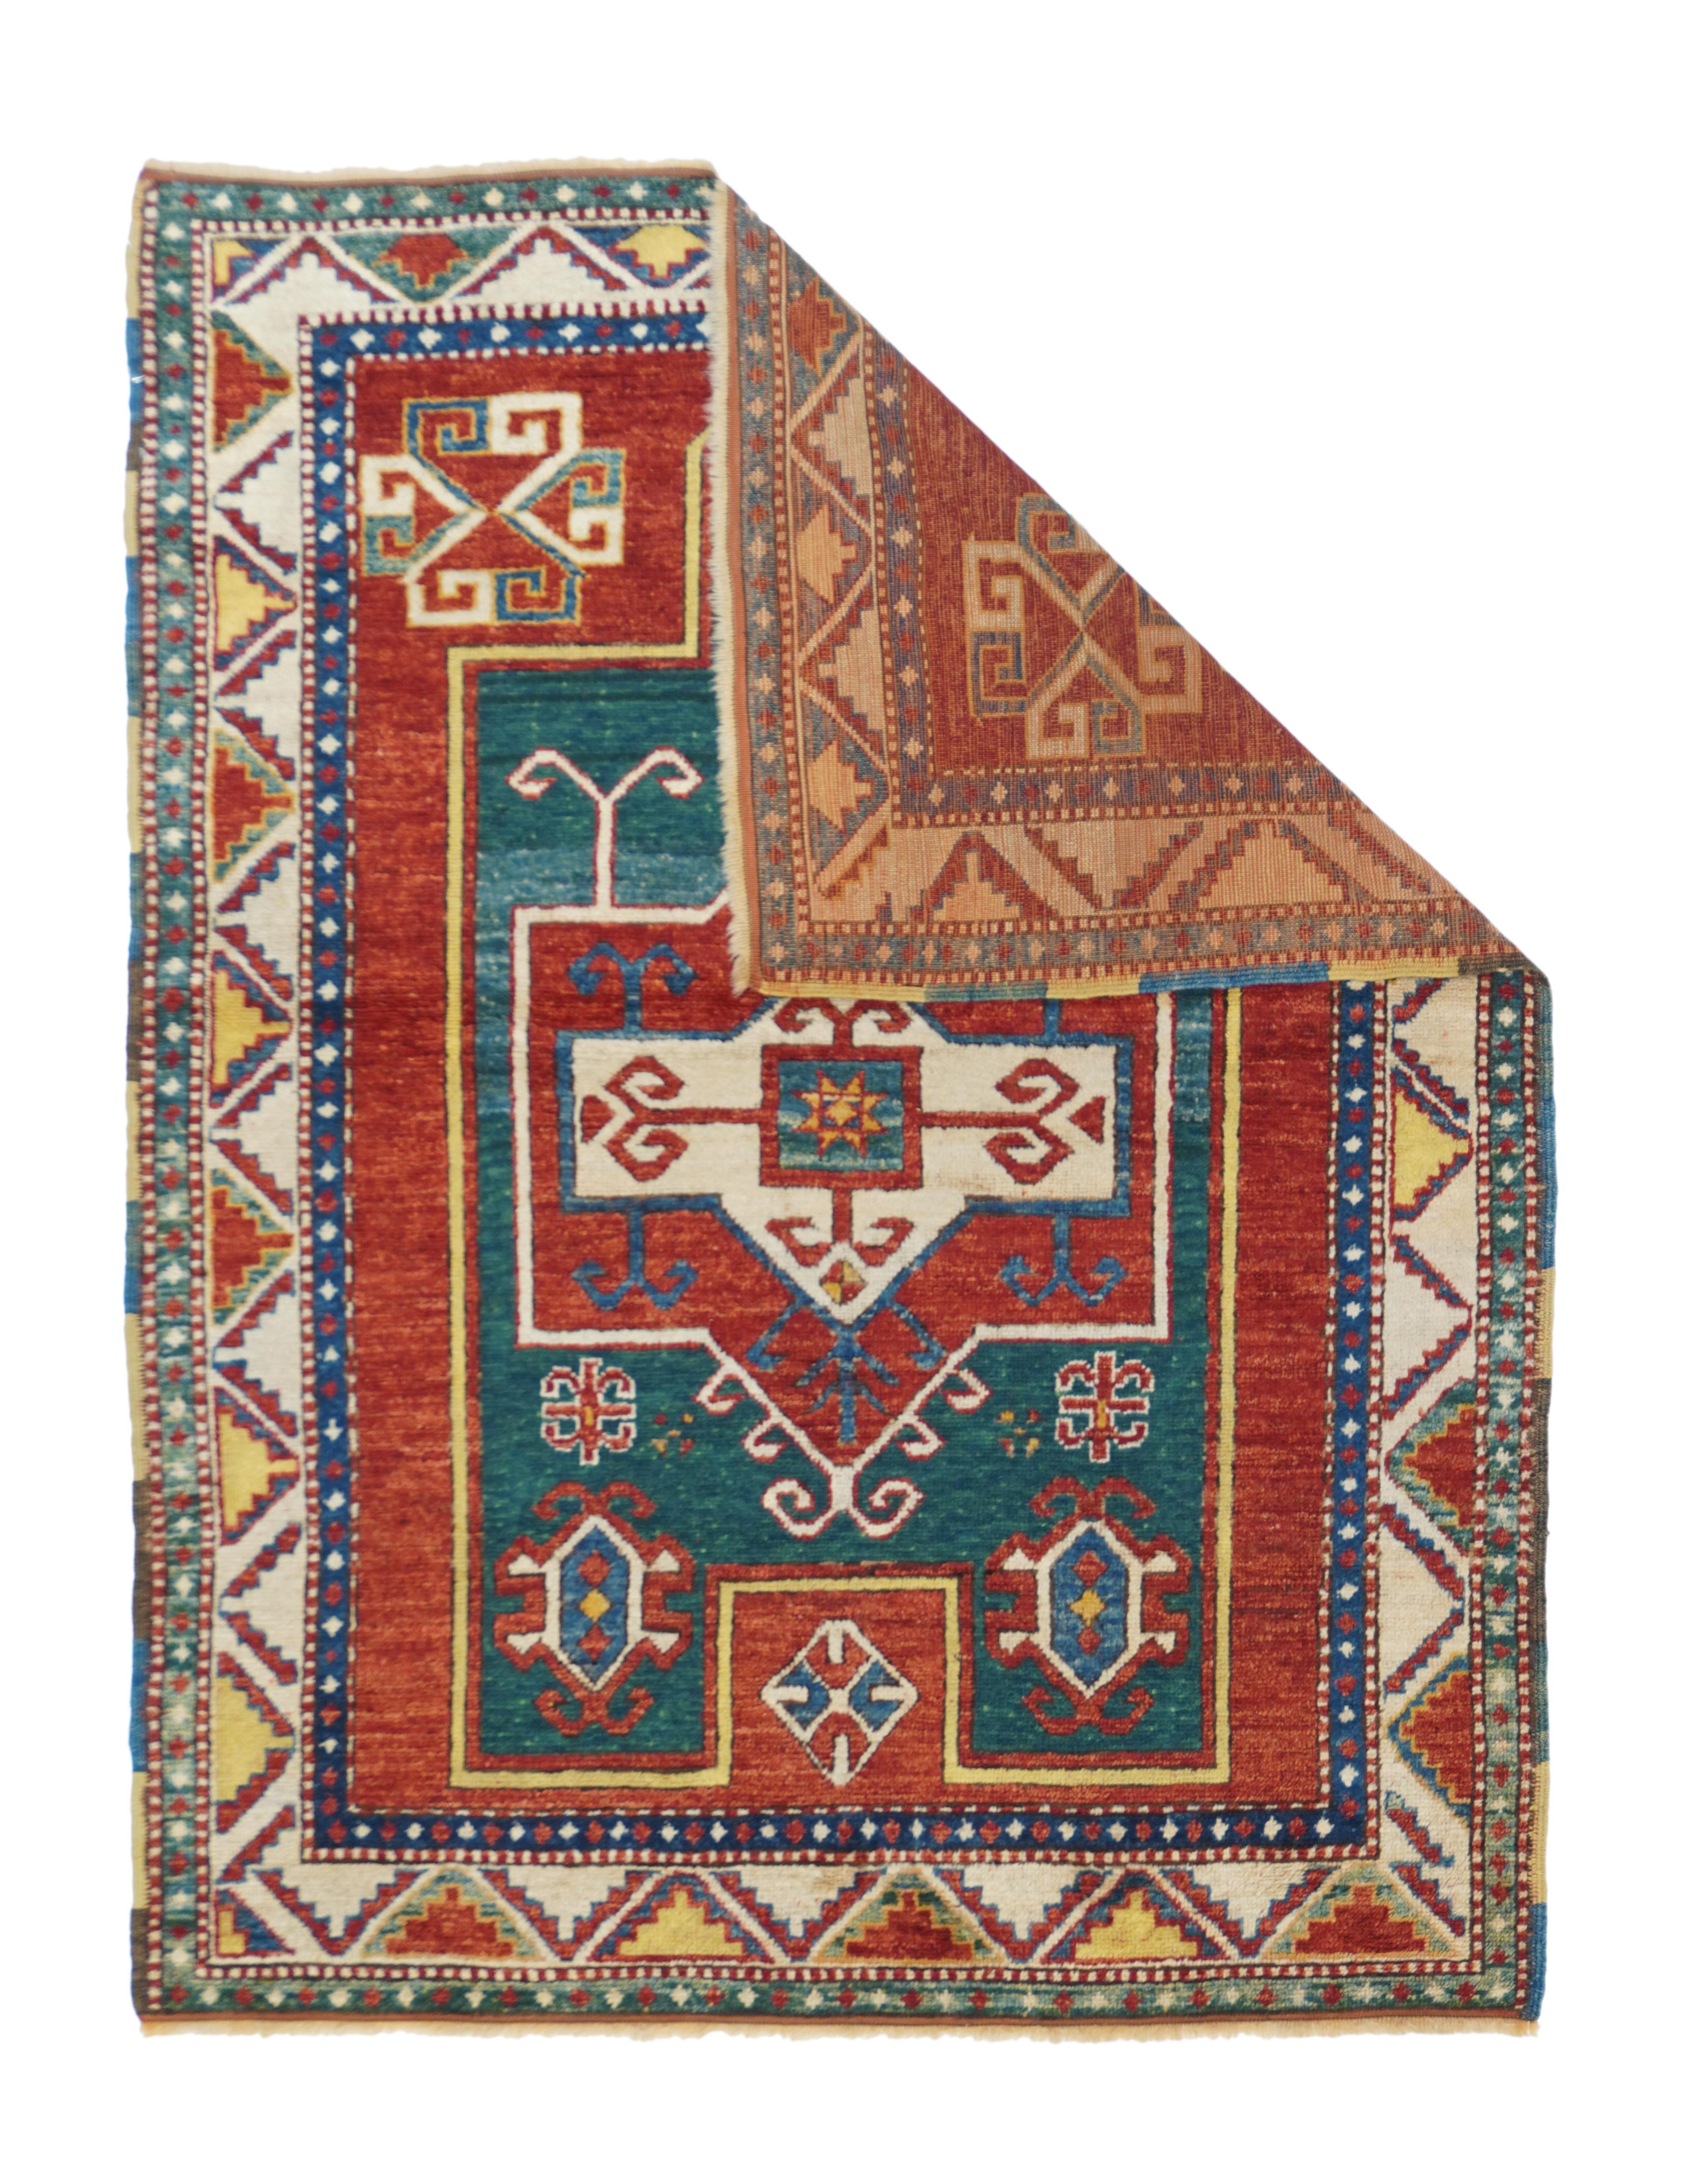 This is a very classic Fachralo type of southwest Caucasian Kazak prayer rug with a relatively narrow natural dye palette including: madder red for the field; abrashed denim blue for the floating niche area; yellow and green for accents; and dark